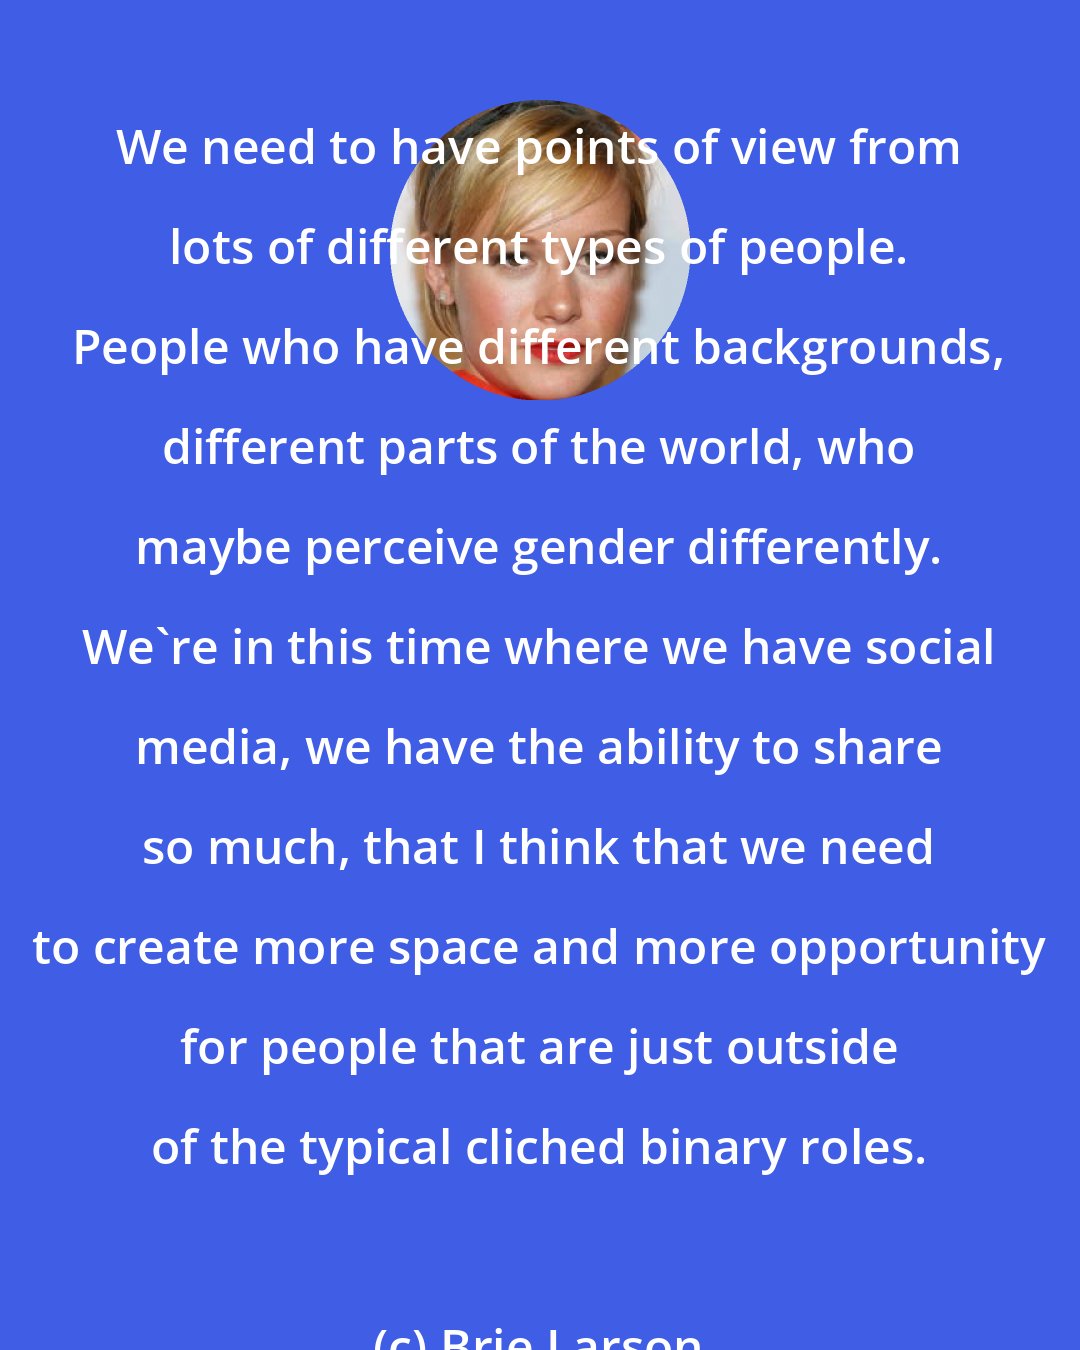 Brie Larson: We need to have points of view from lots of different types of people. People who have different backgrounds, different parts of the world, who maybe perceive gender differently. We're in this time where we have social media, we have the ability to share so much, that I think that we need to create more space and more opportunity for people that are just outside of the typical cliched binary roles.